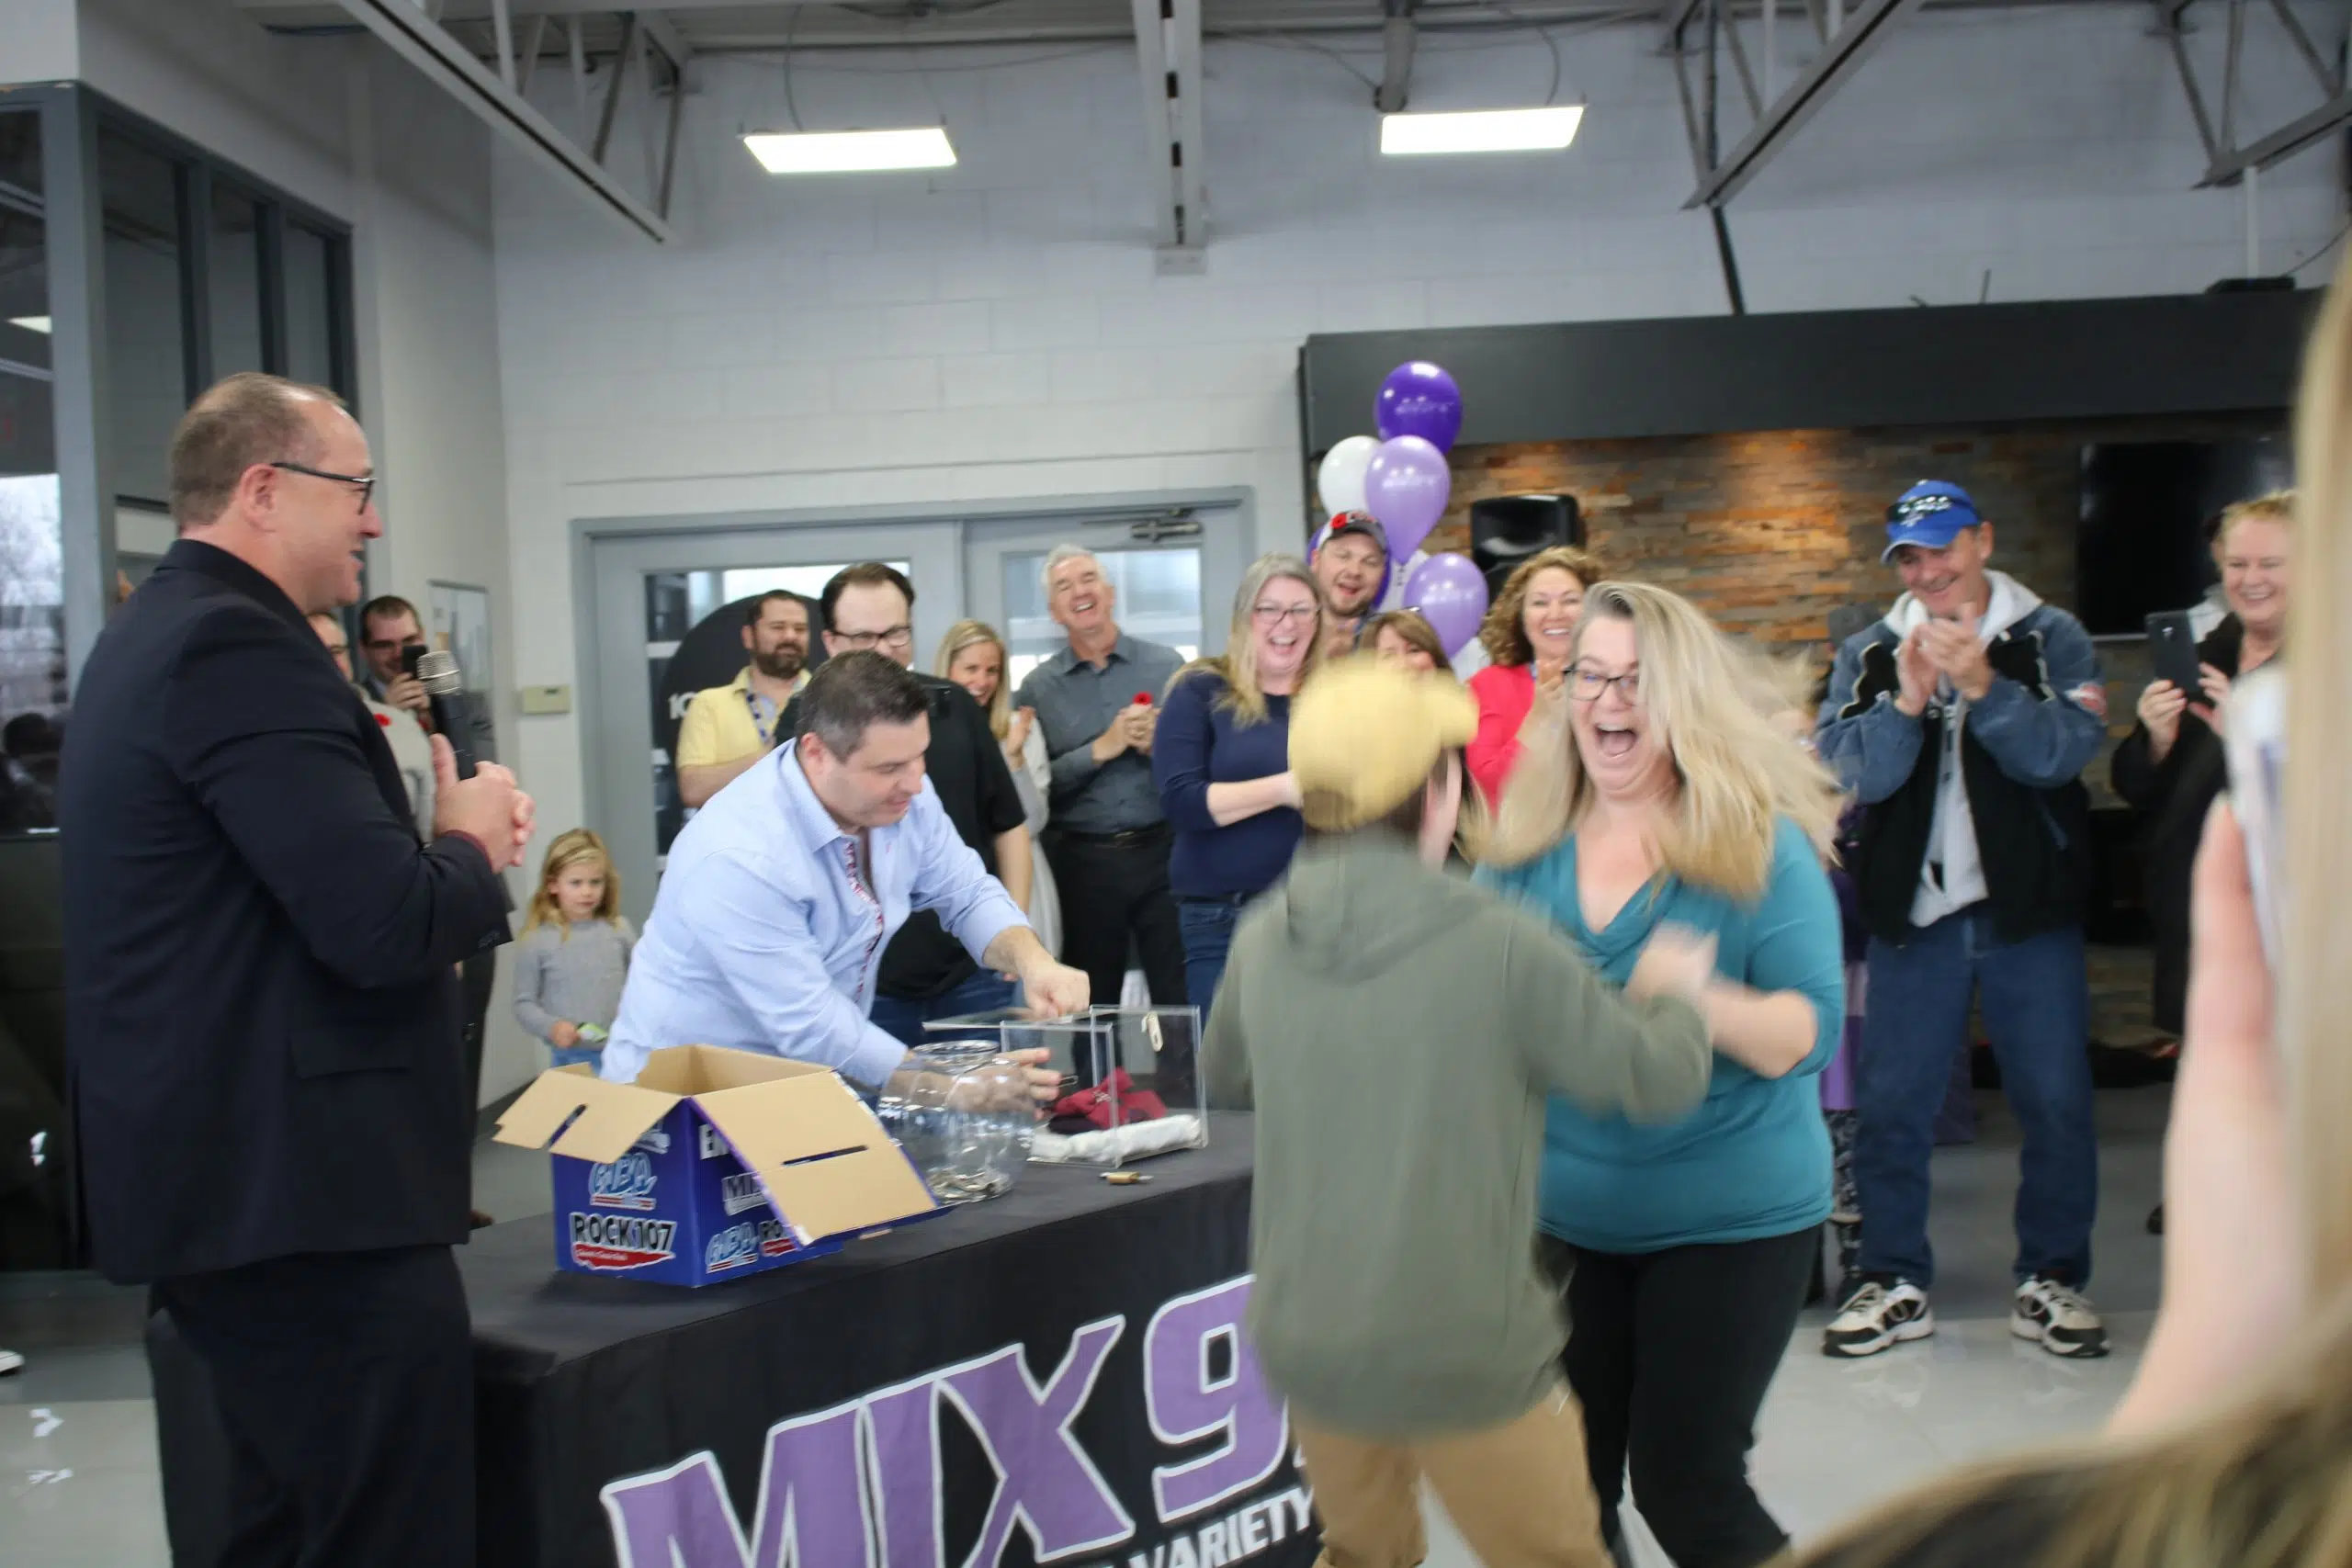 Trenton woman wins "Mixin' in a Mirage" 2018